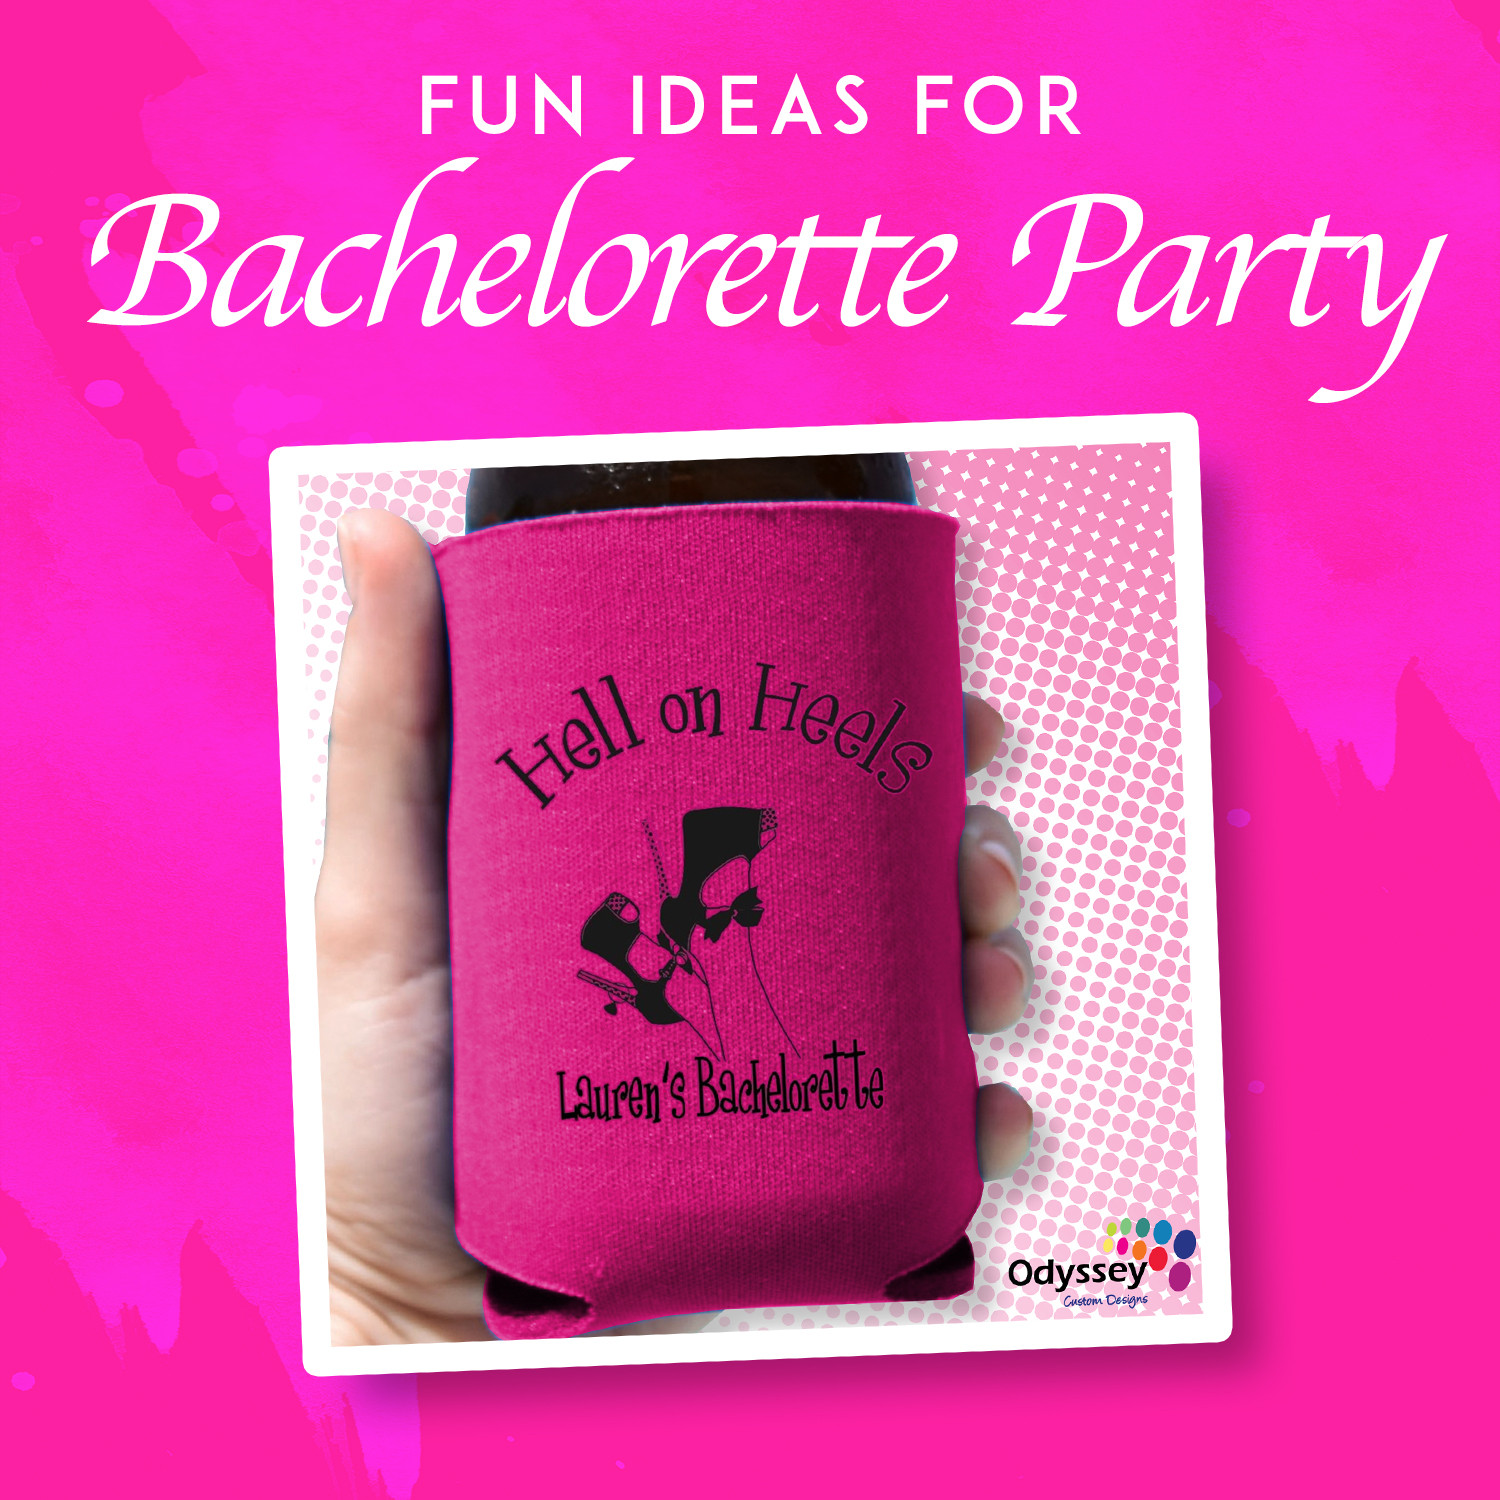 Fun Bachelorette Party Ideas
 5 Ideas for the Perfect Bachelorette Party Odyssey